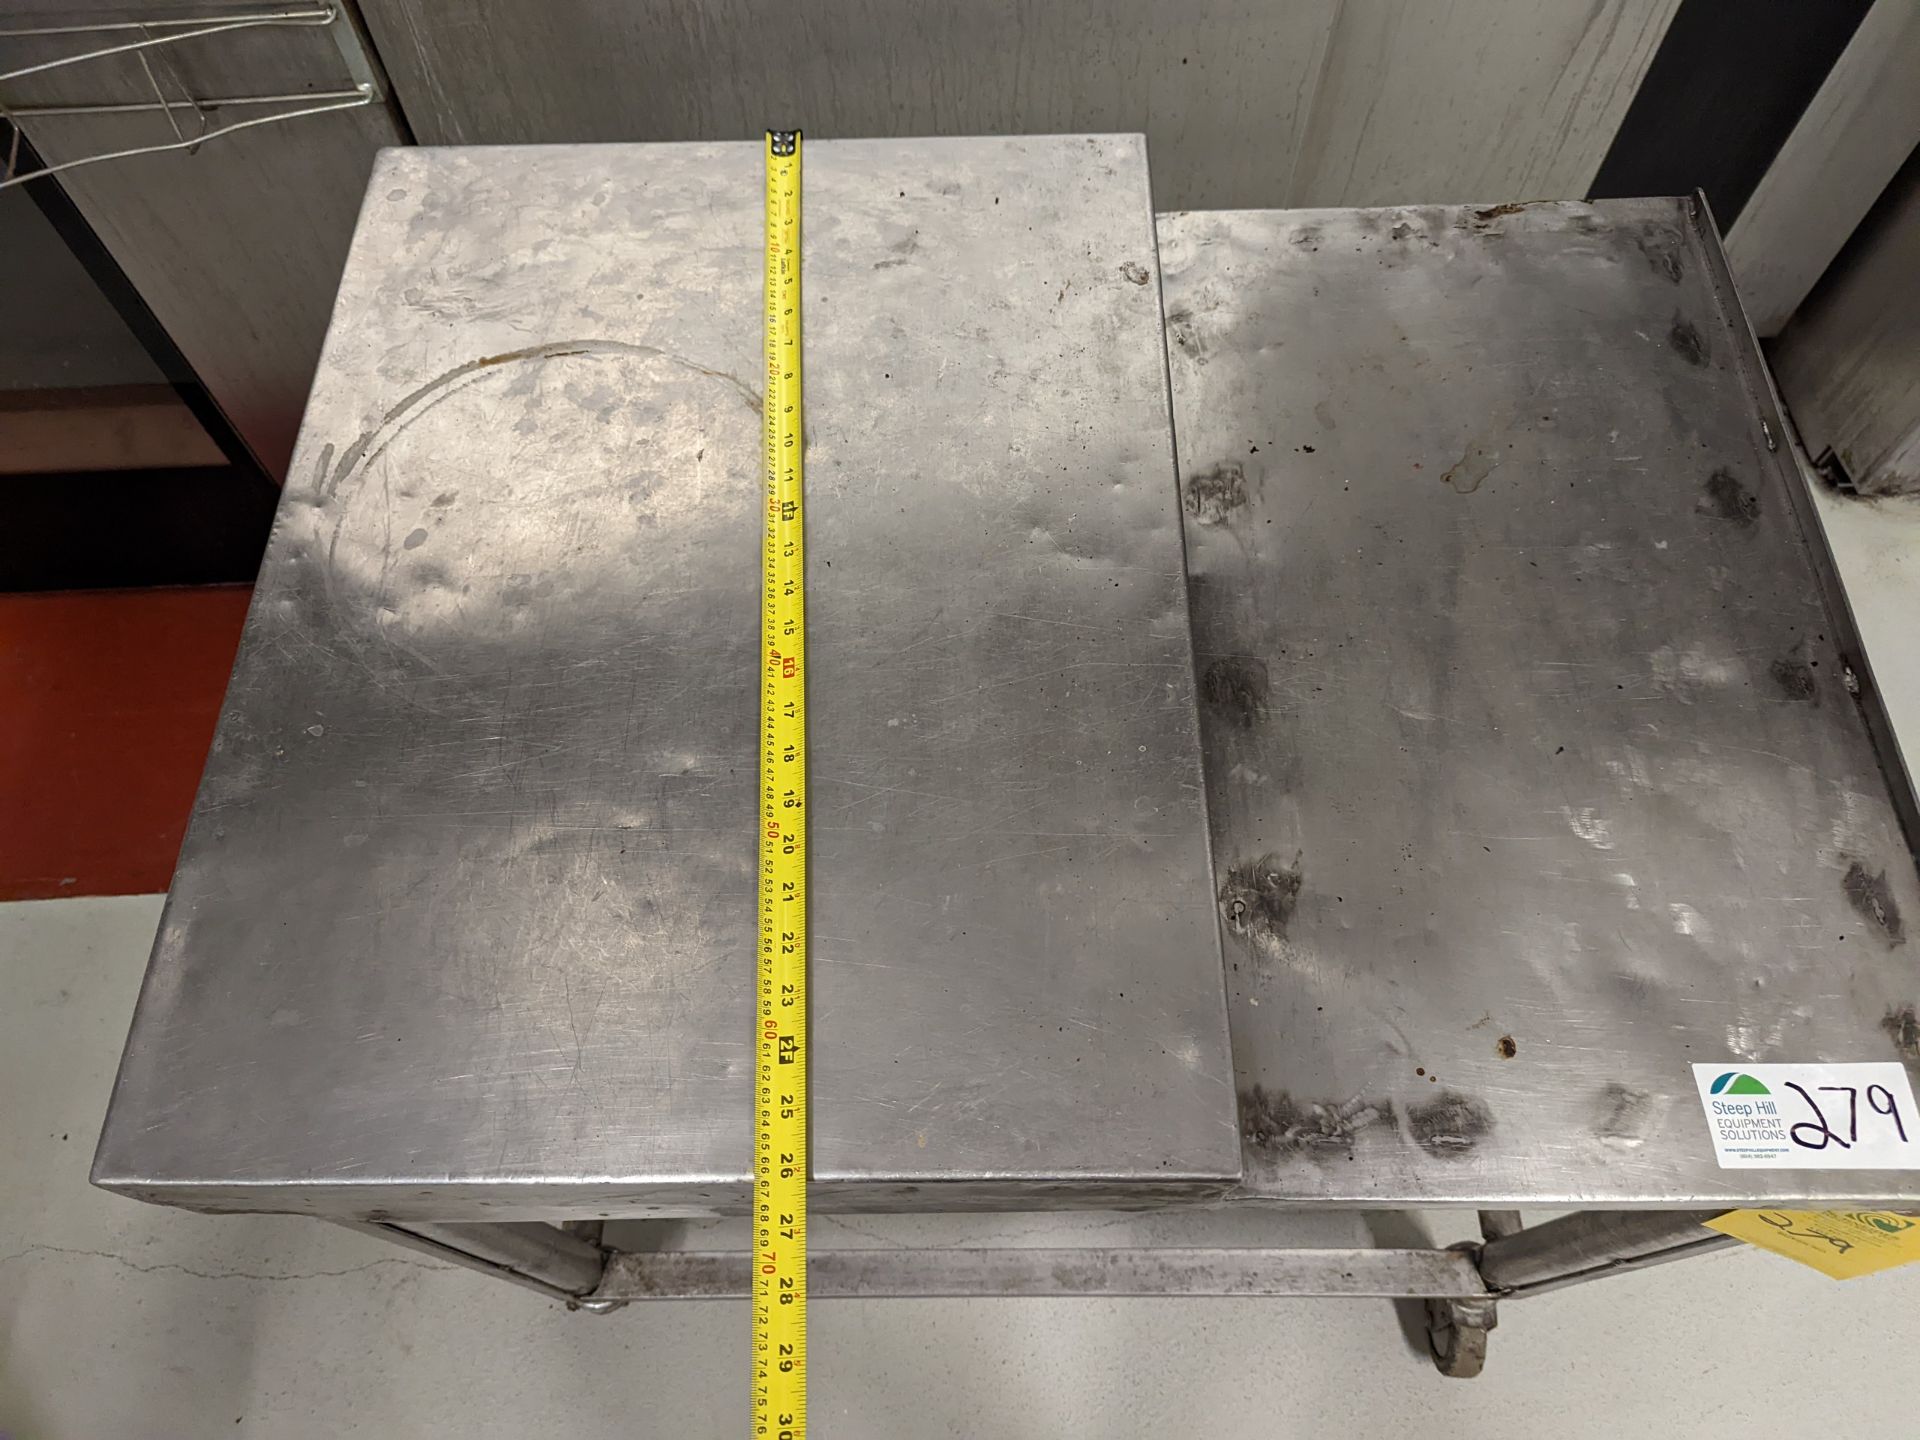 Stainless Rolling Table with shelf, 35in x 26in x 35in - Image 3 of 4